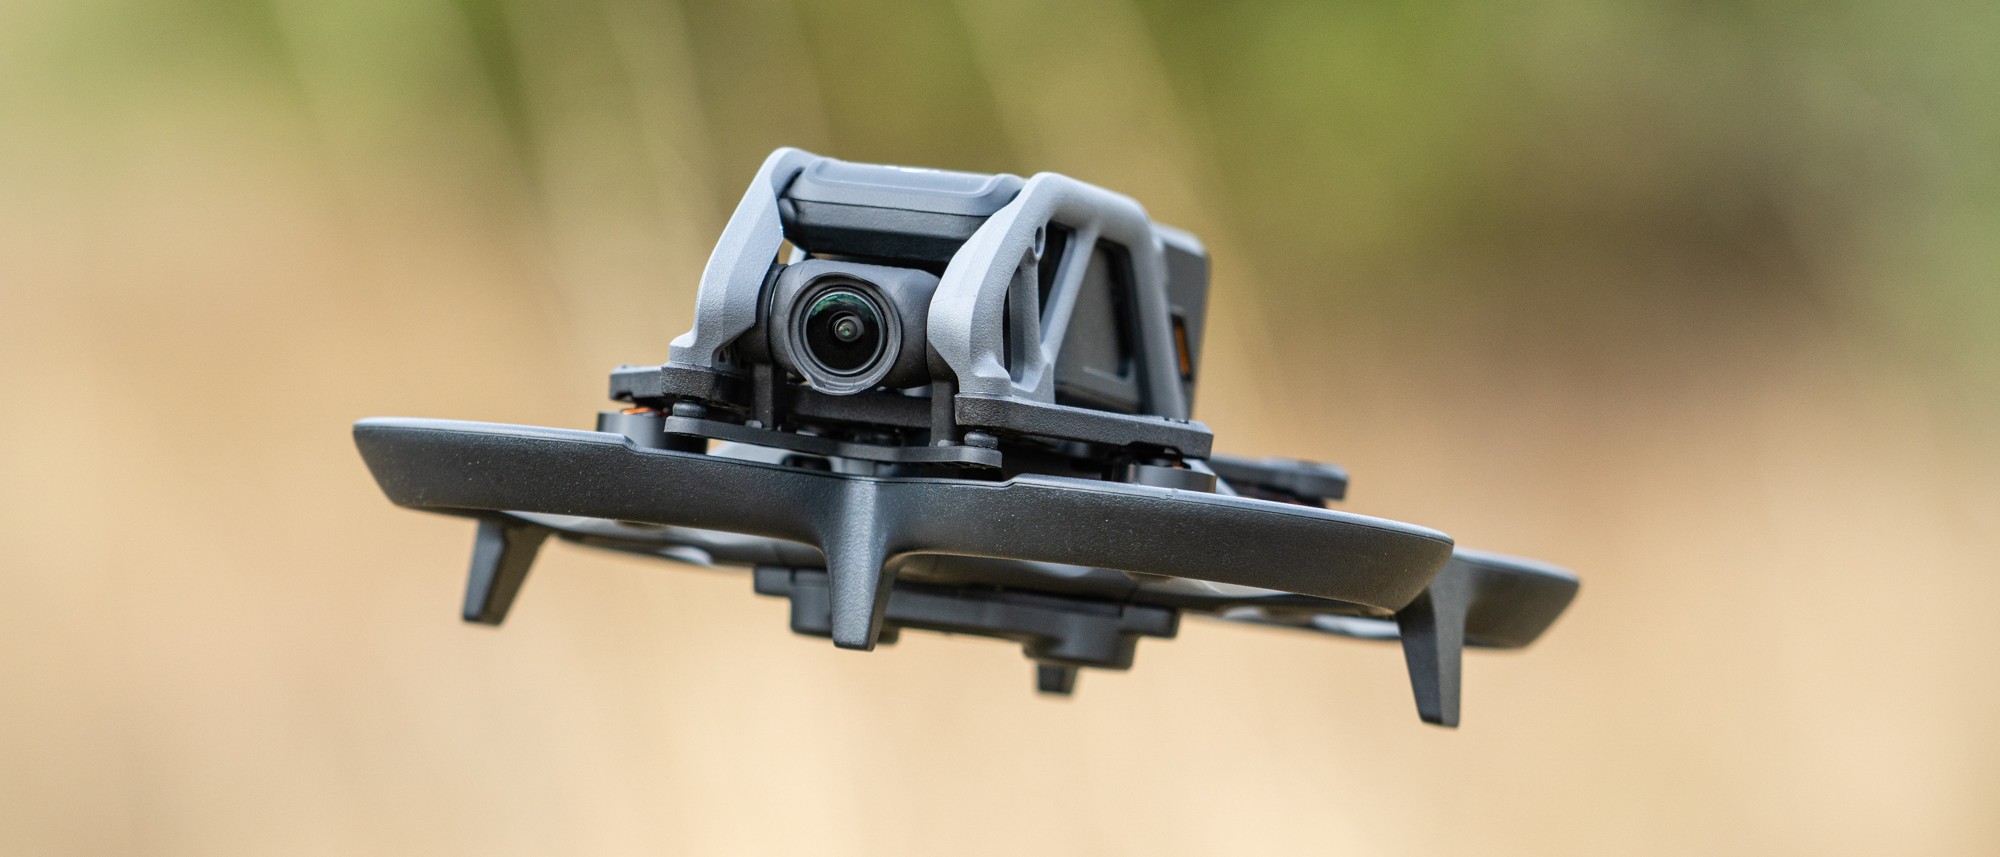 DJI Avata review: the video drone for suitable for all skill